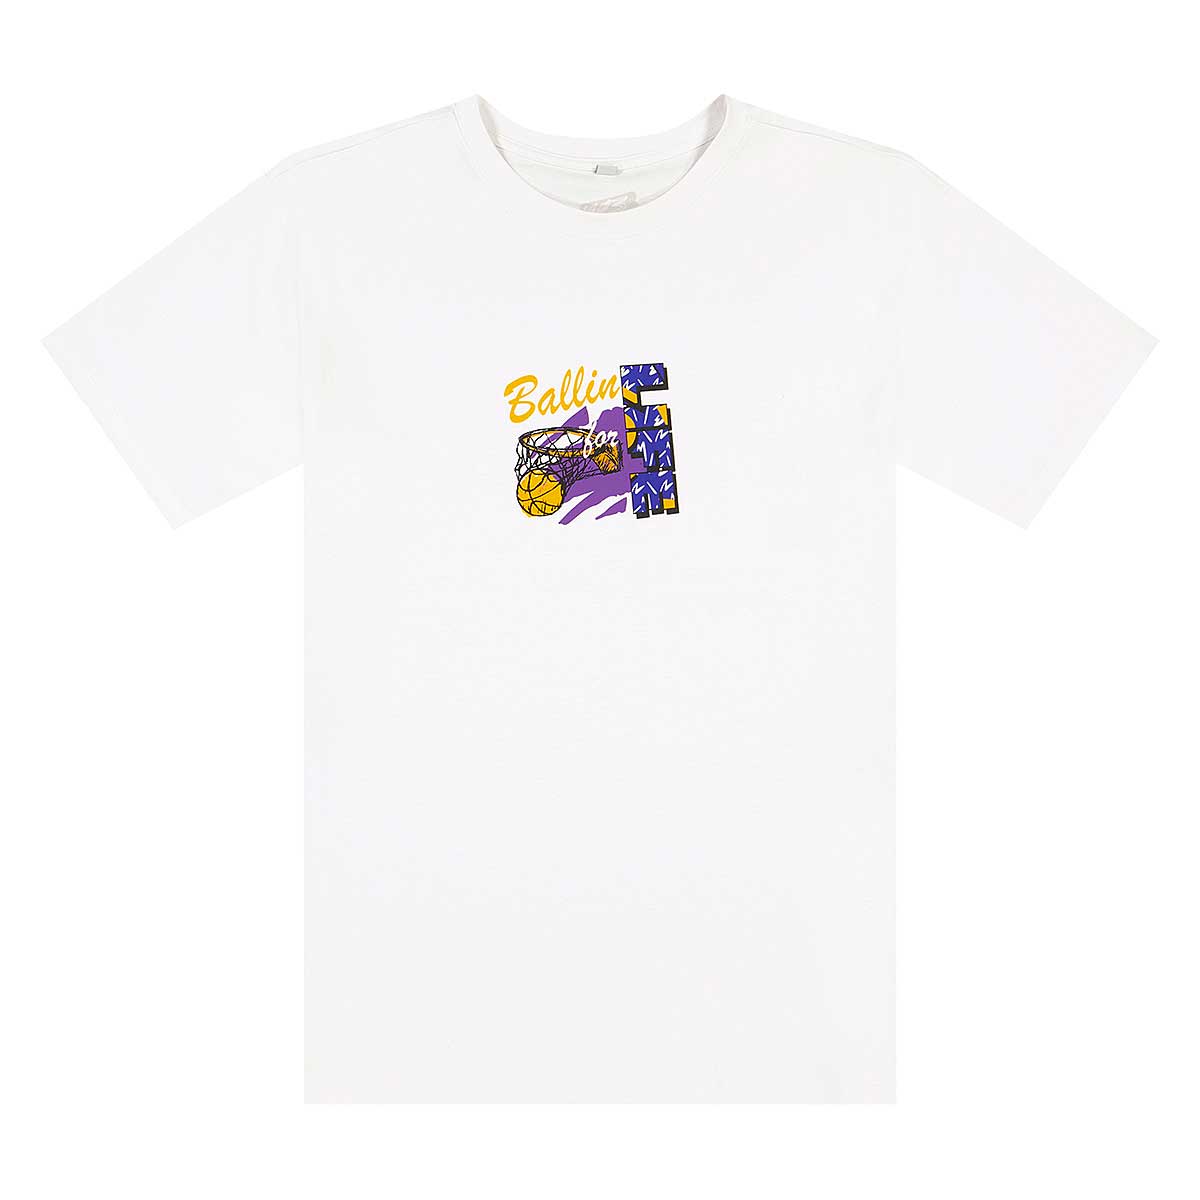 Image of 1993 Ballin For Life Statement T-shirt, White